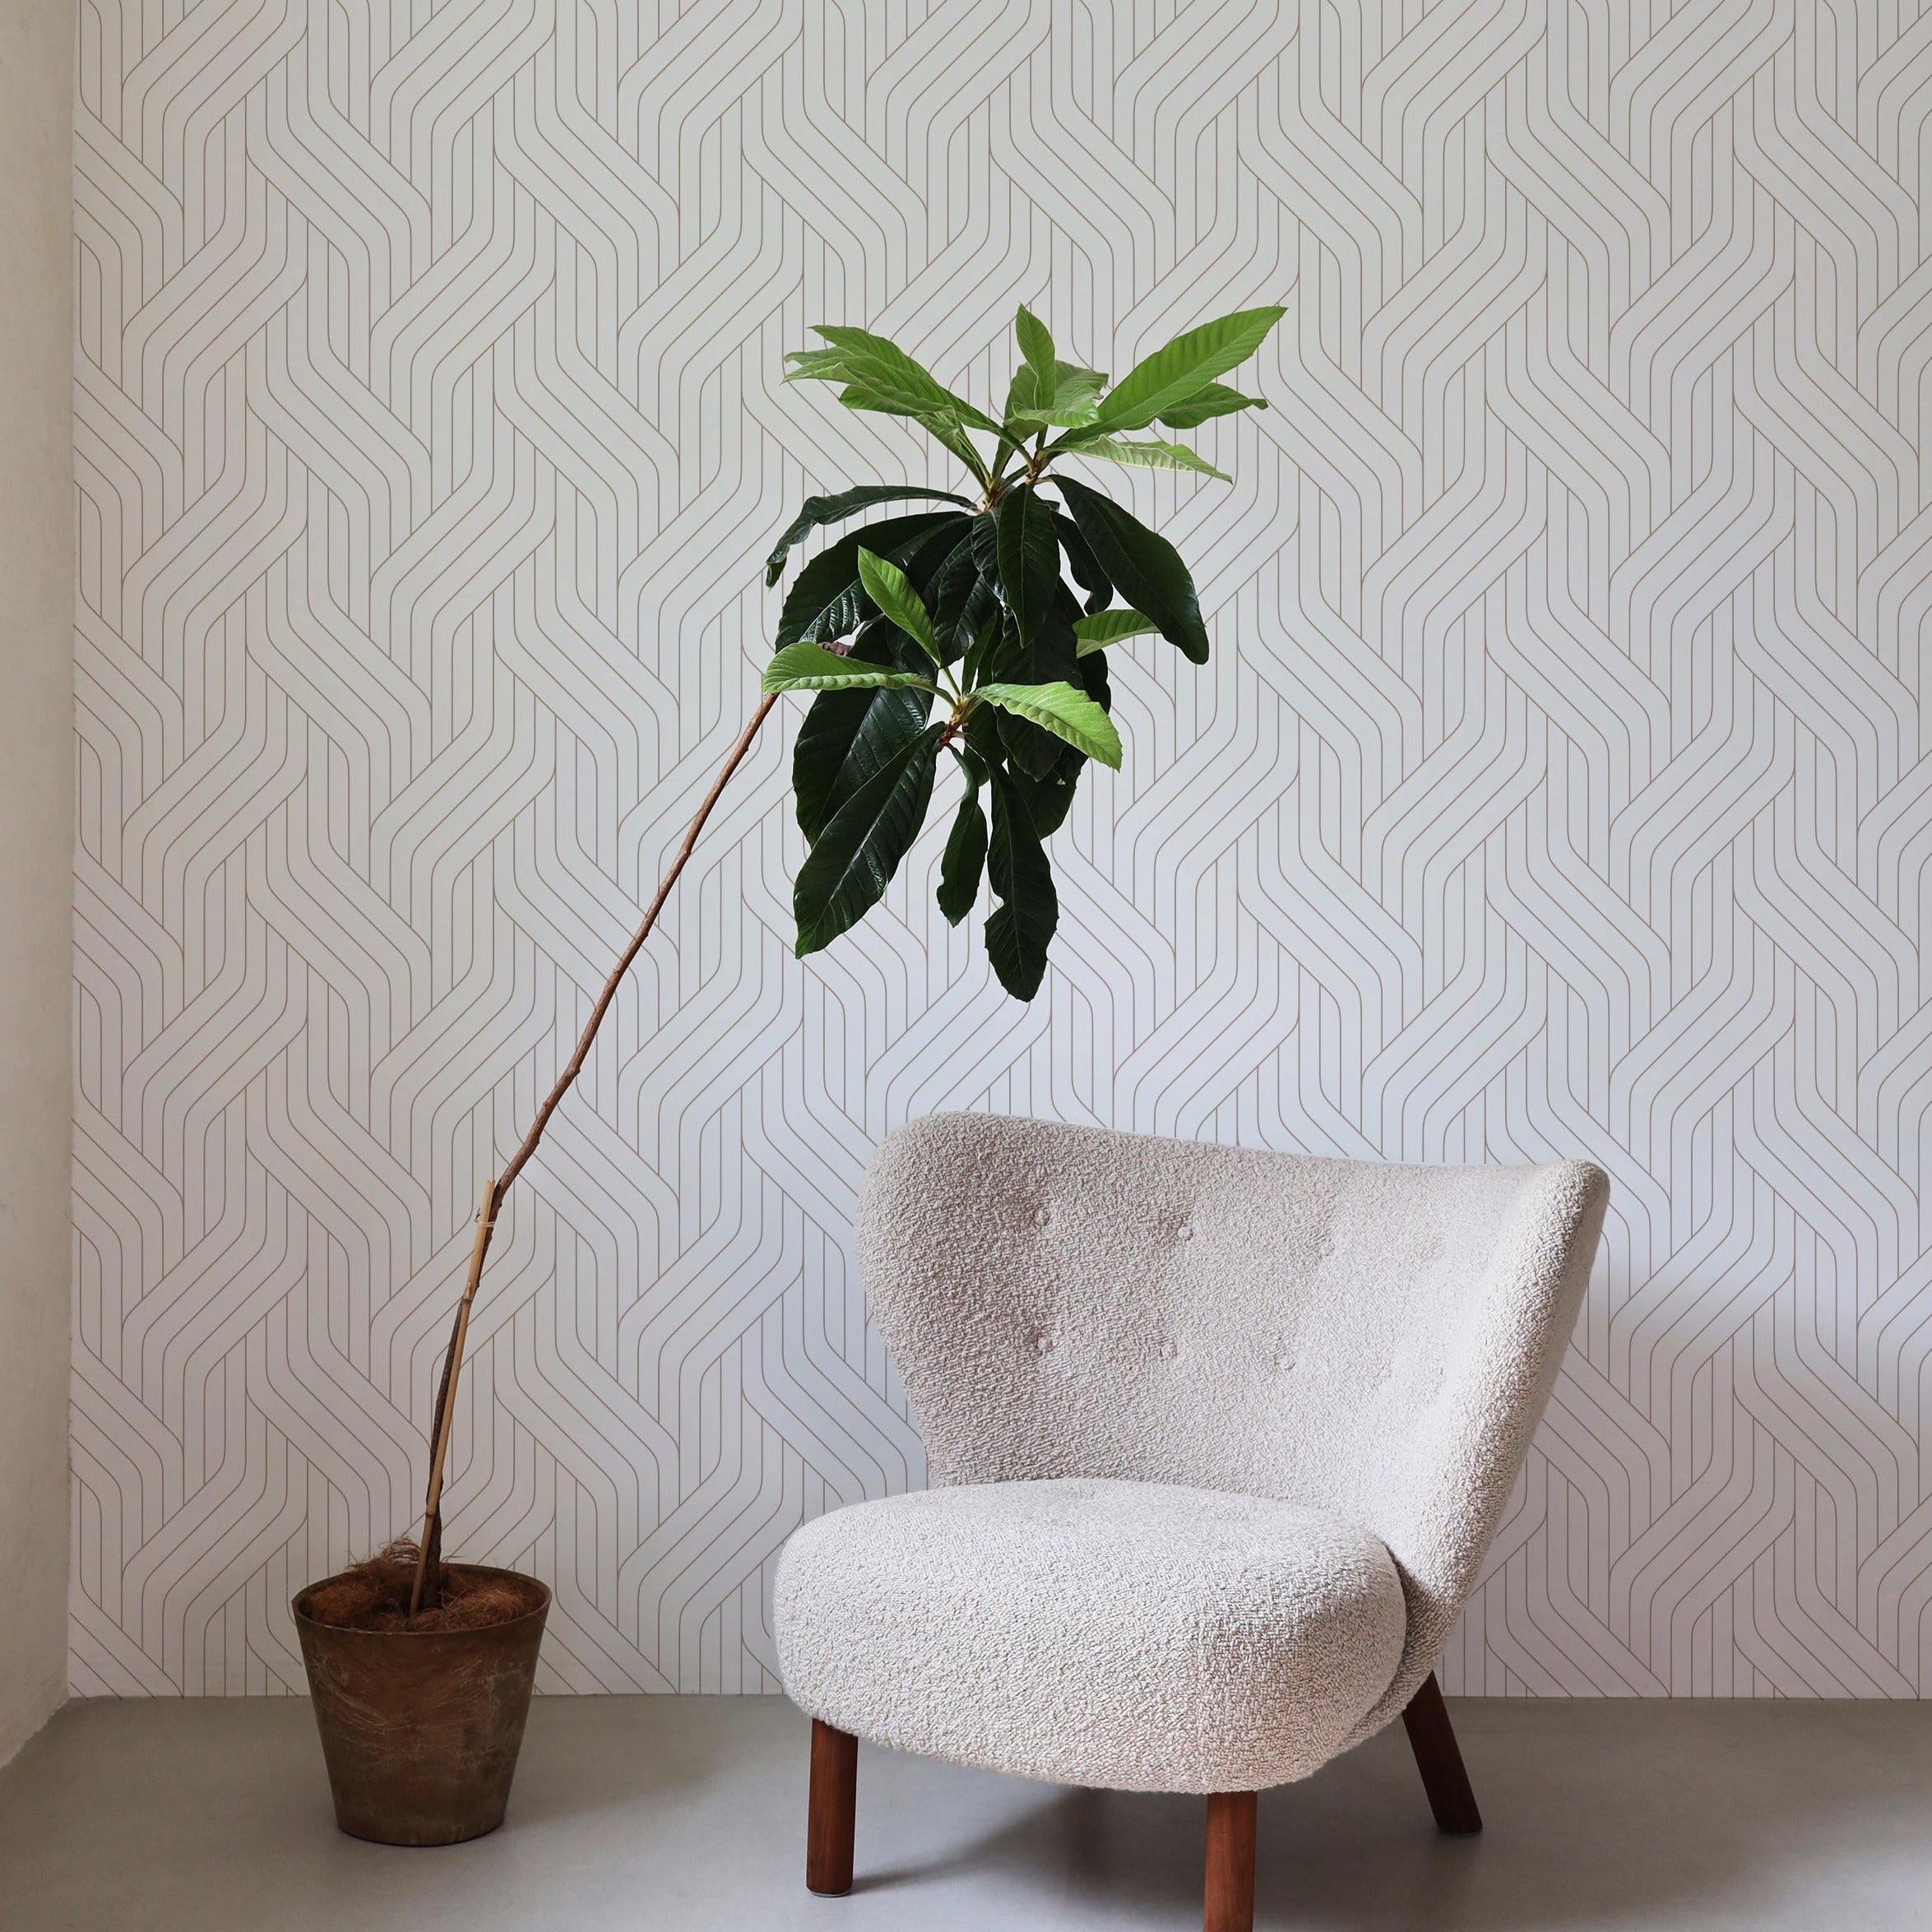 Geometric Wallpaper in Commercial Spaces: What Works